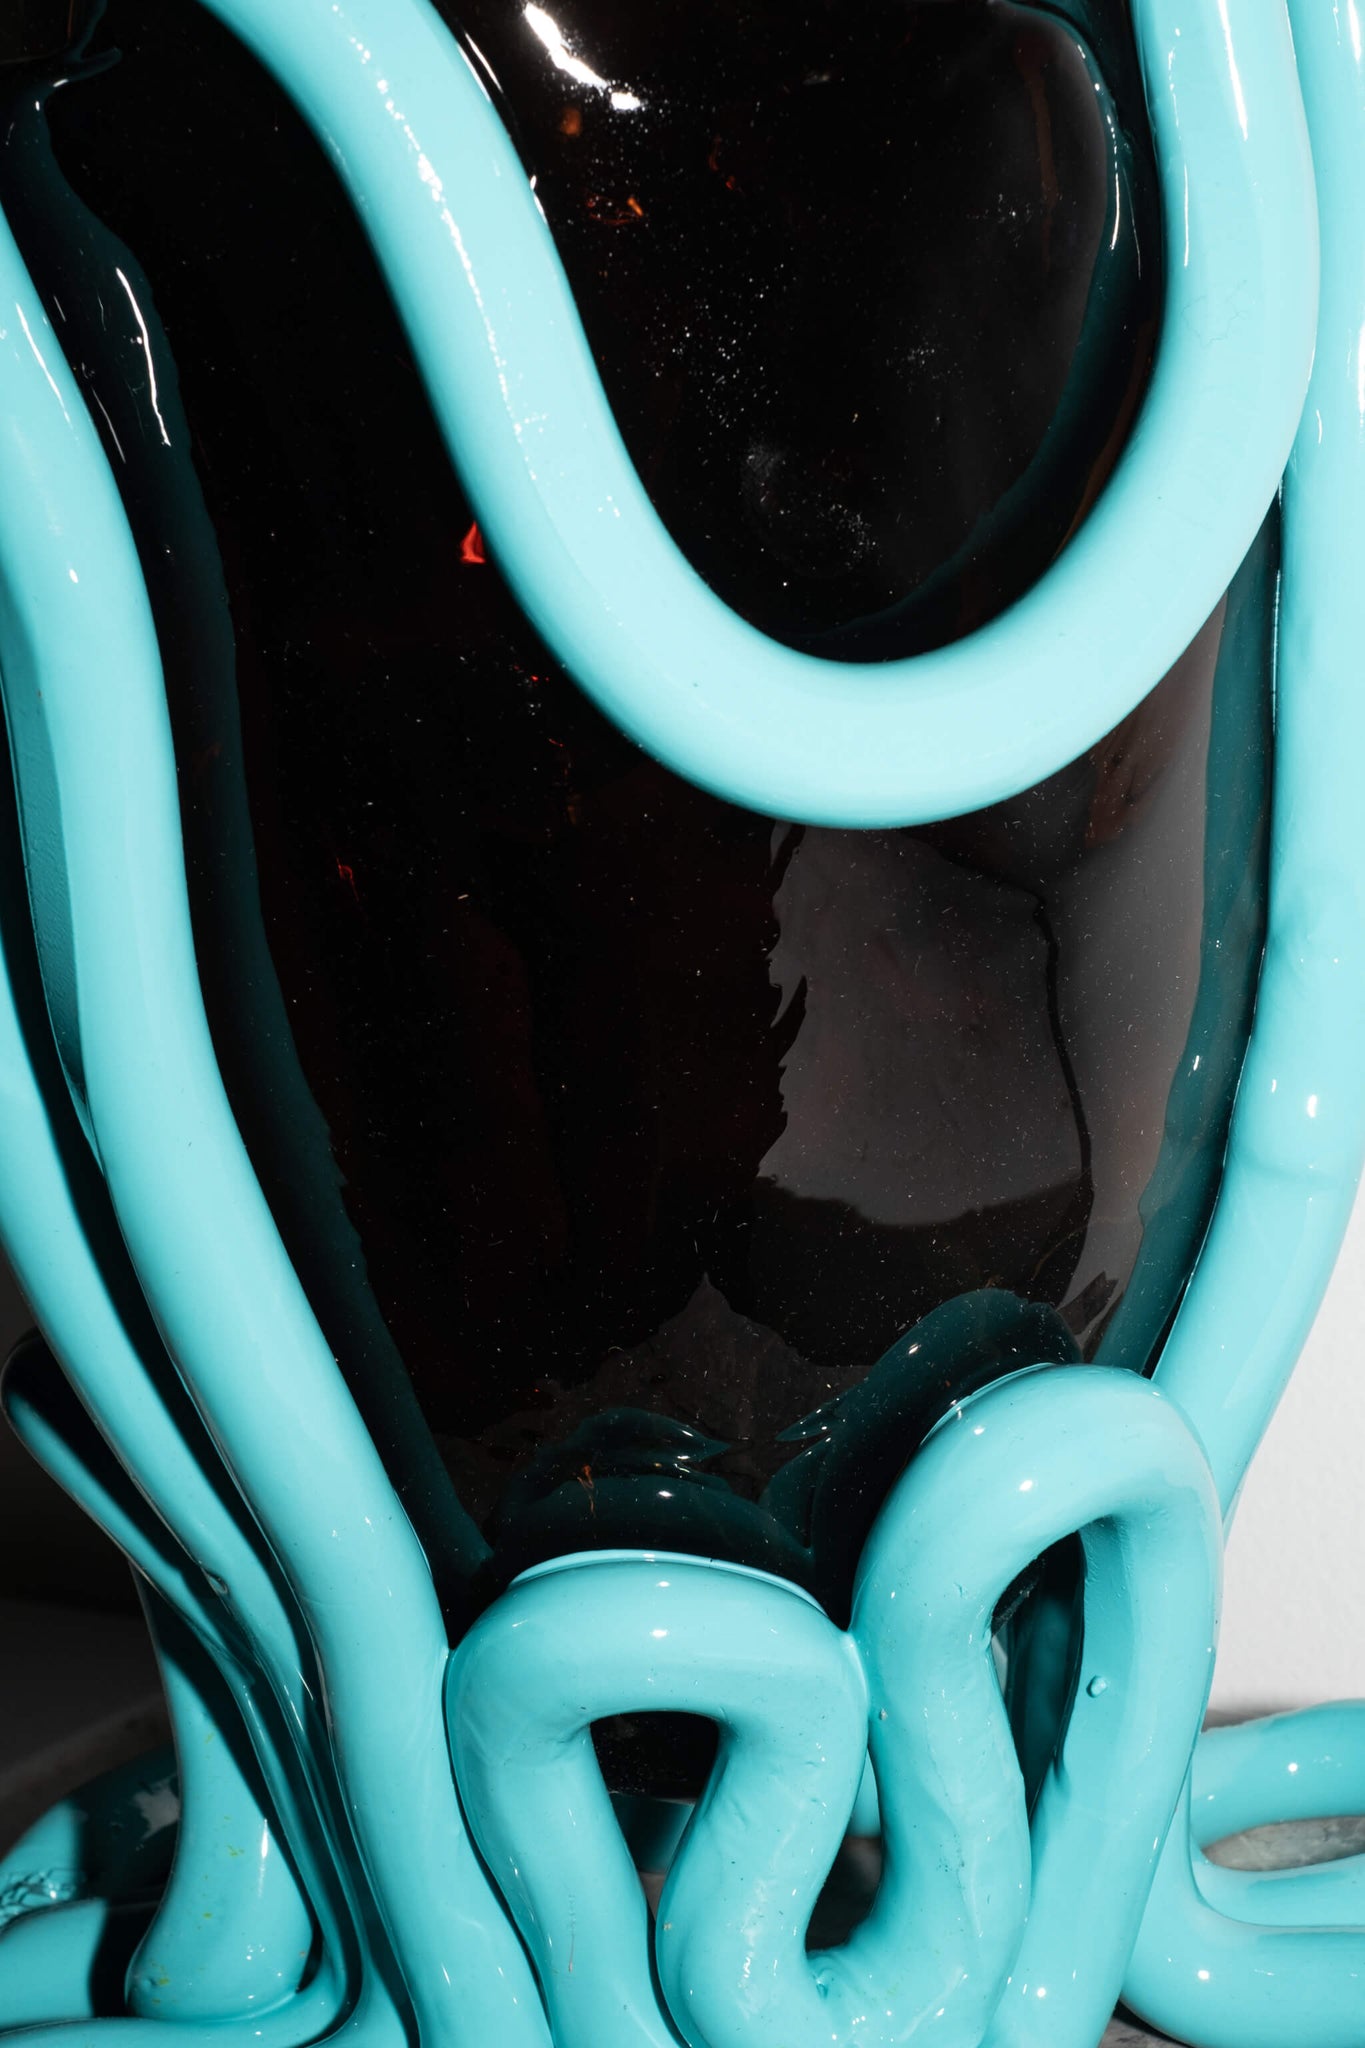 Fume & Turqouise Large Resin Indian Summer Vase by Gaetano Pesce for Fish Design, detail view